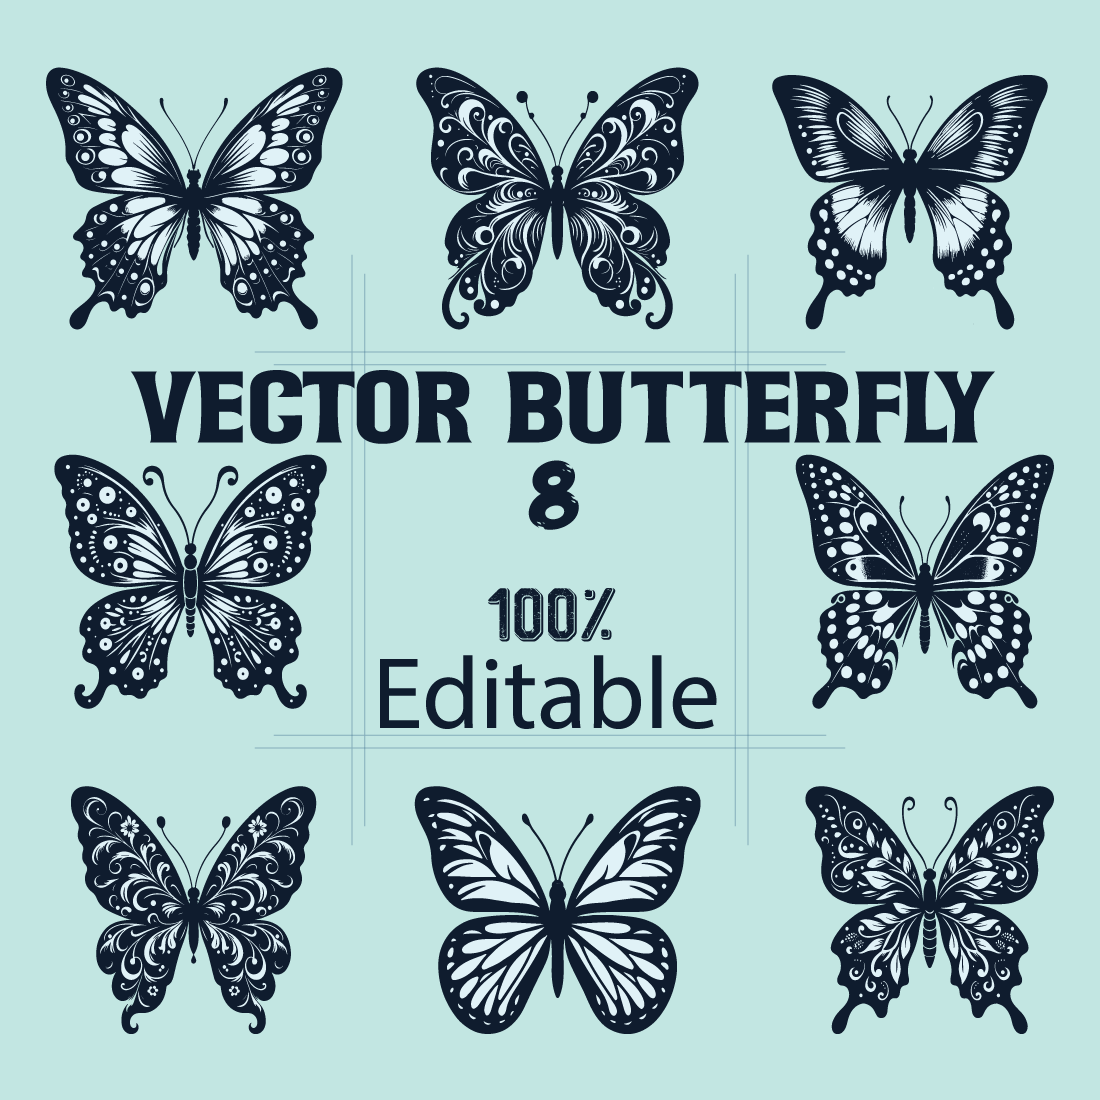 Butterfly vector artwork preview image.